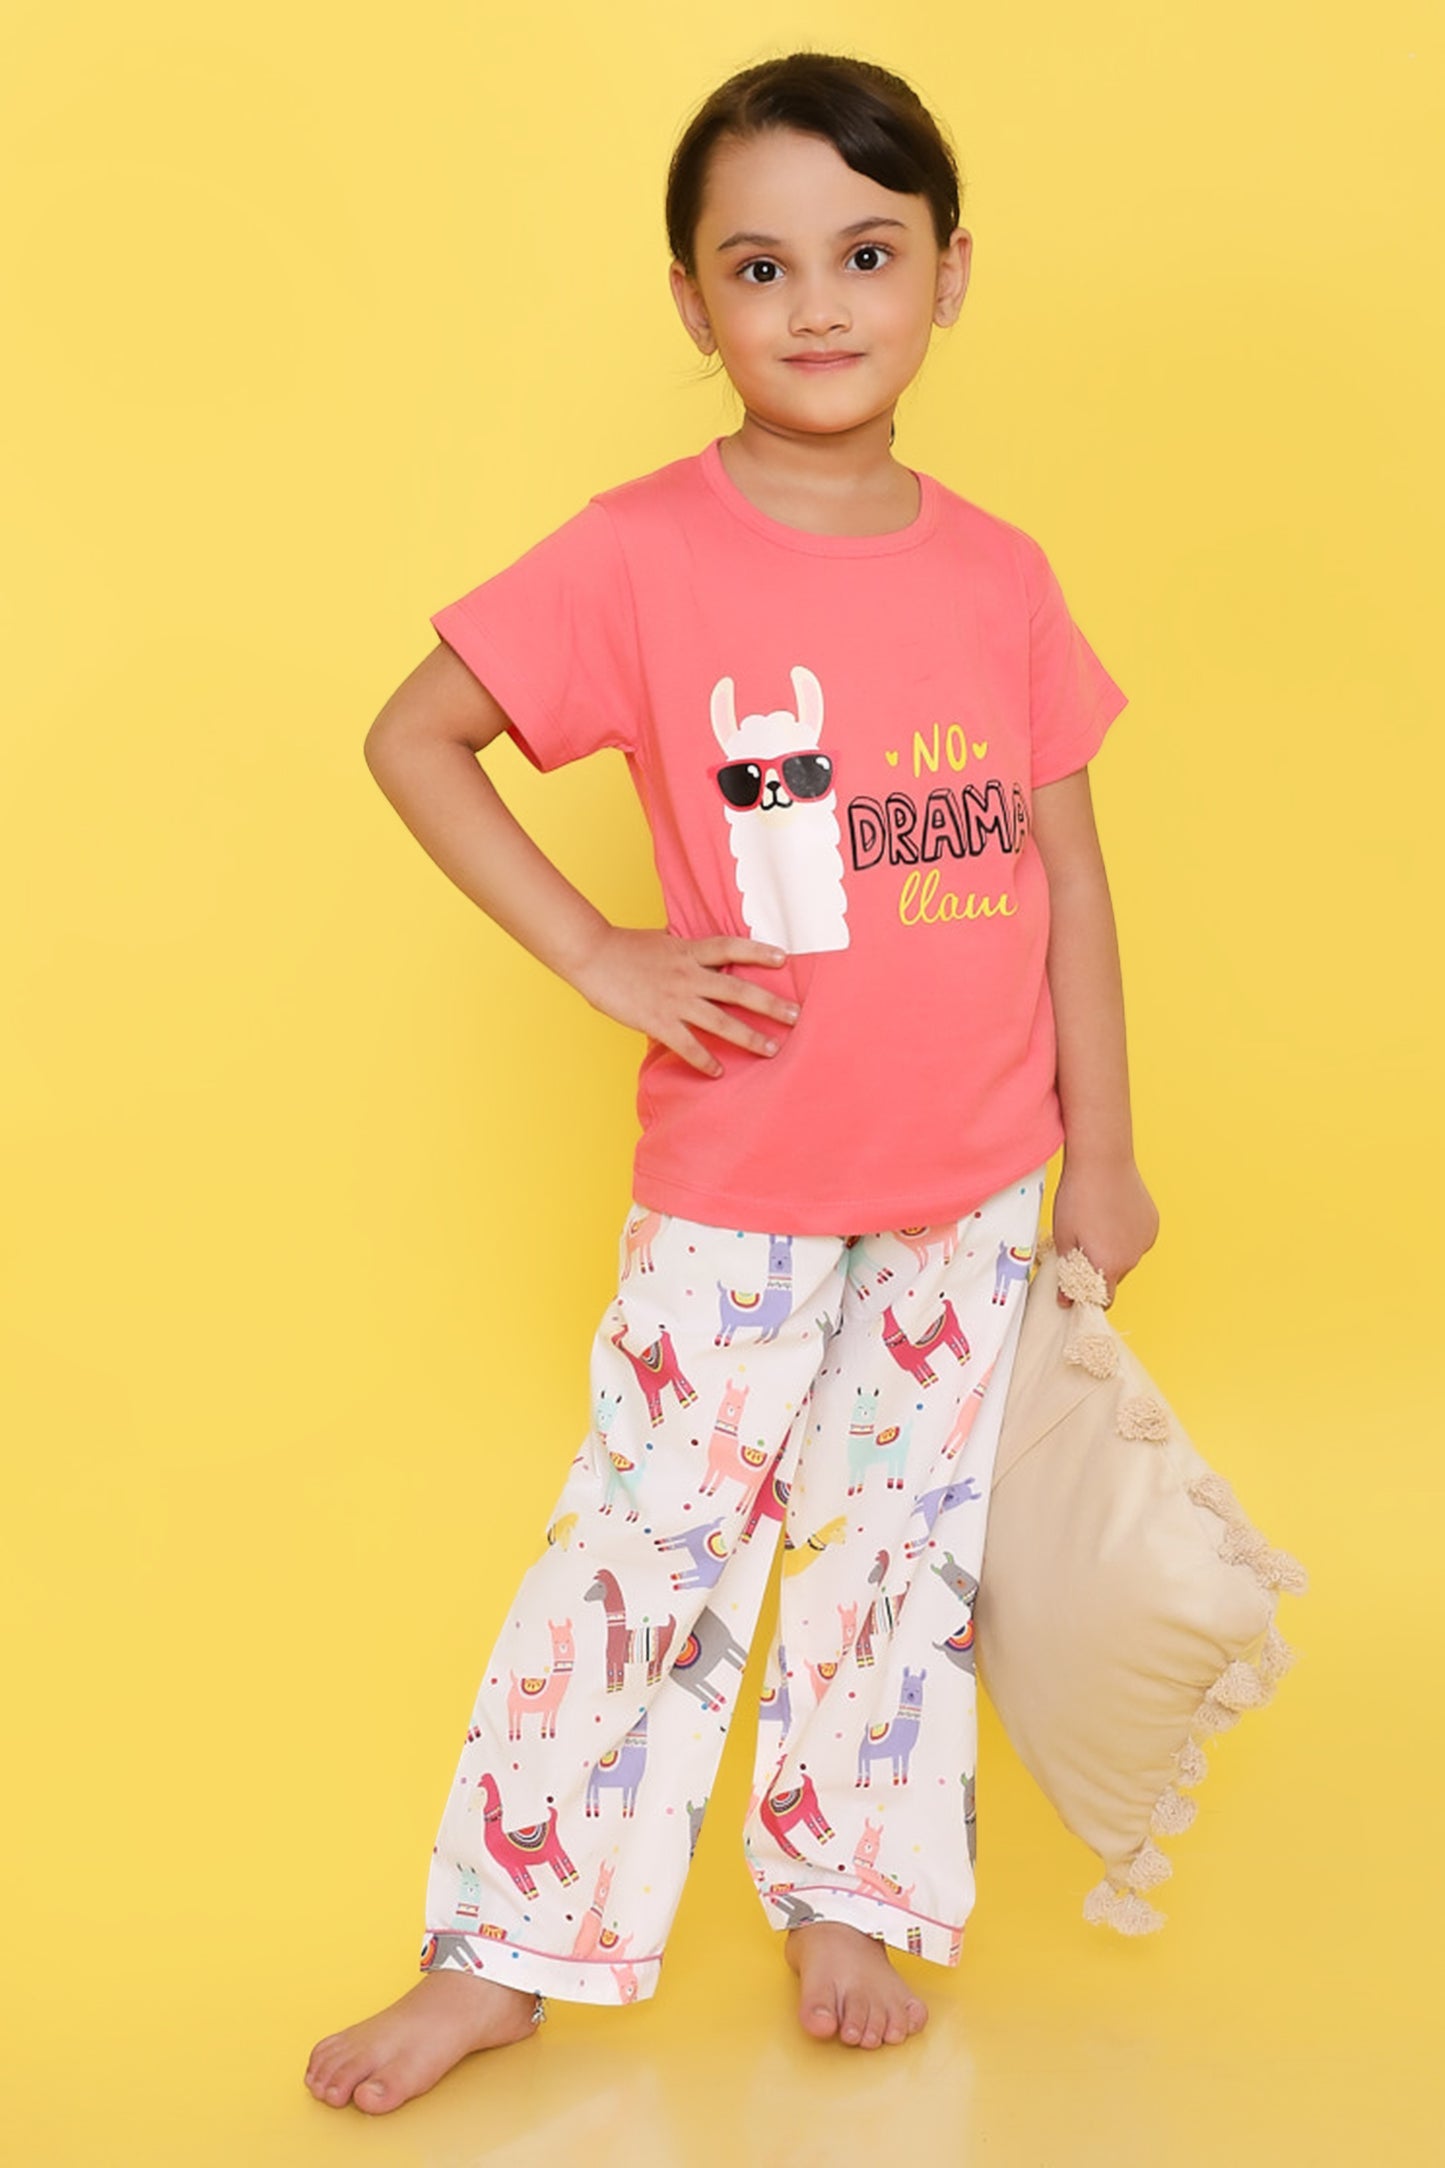 Knitting Doodles Premium Cotton Kids' Night suit with Llama print t-shirt and Pyjama- Pink and White